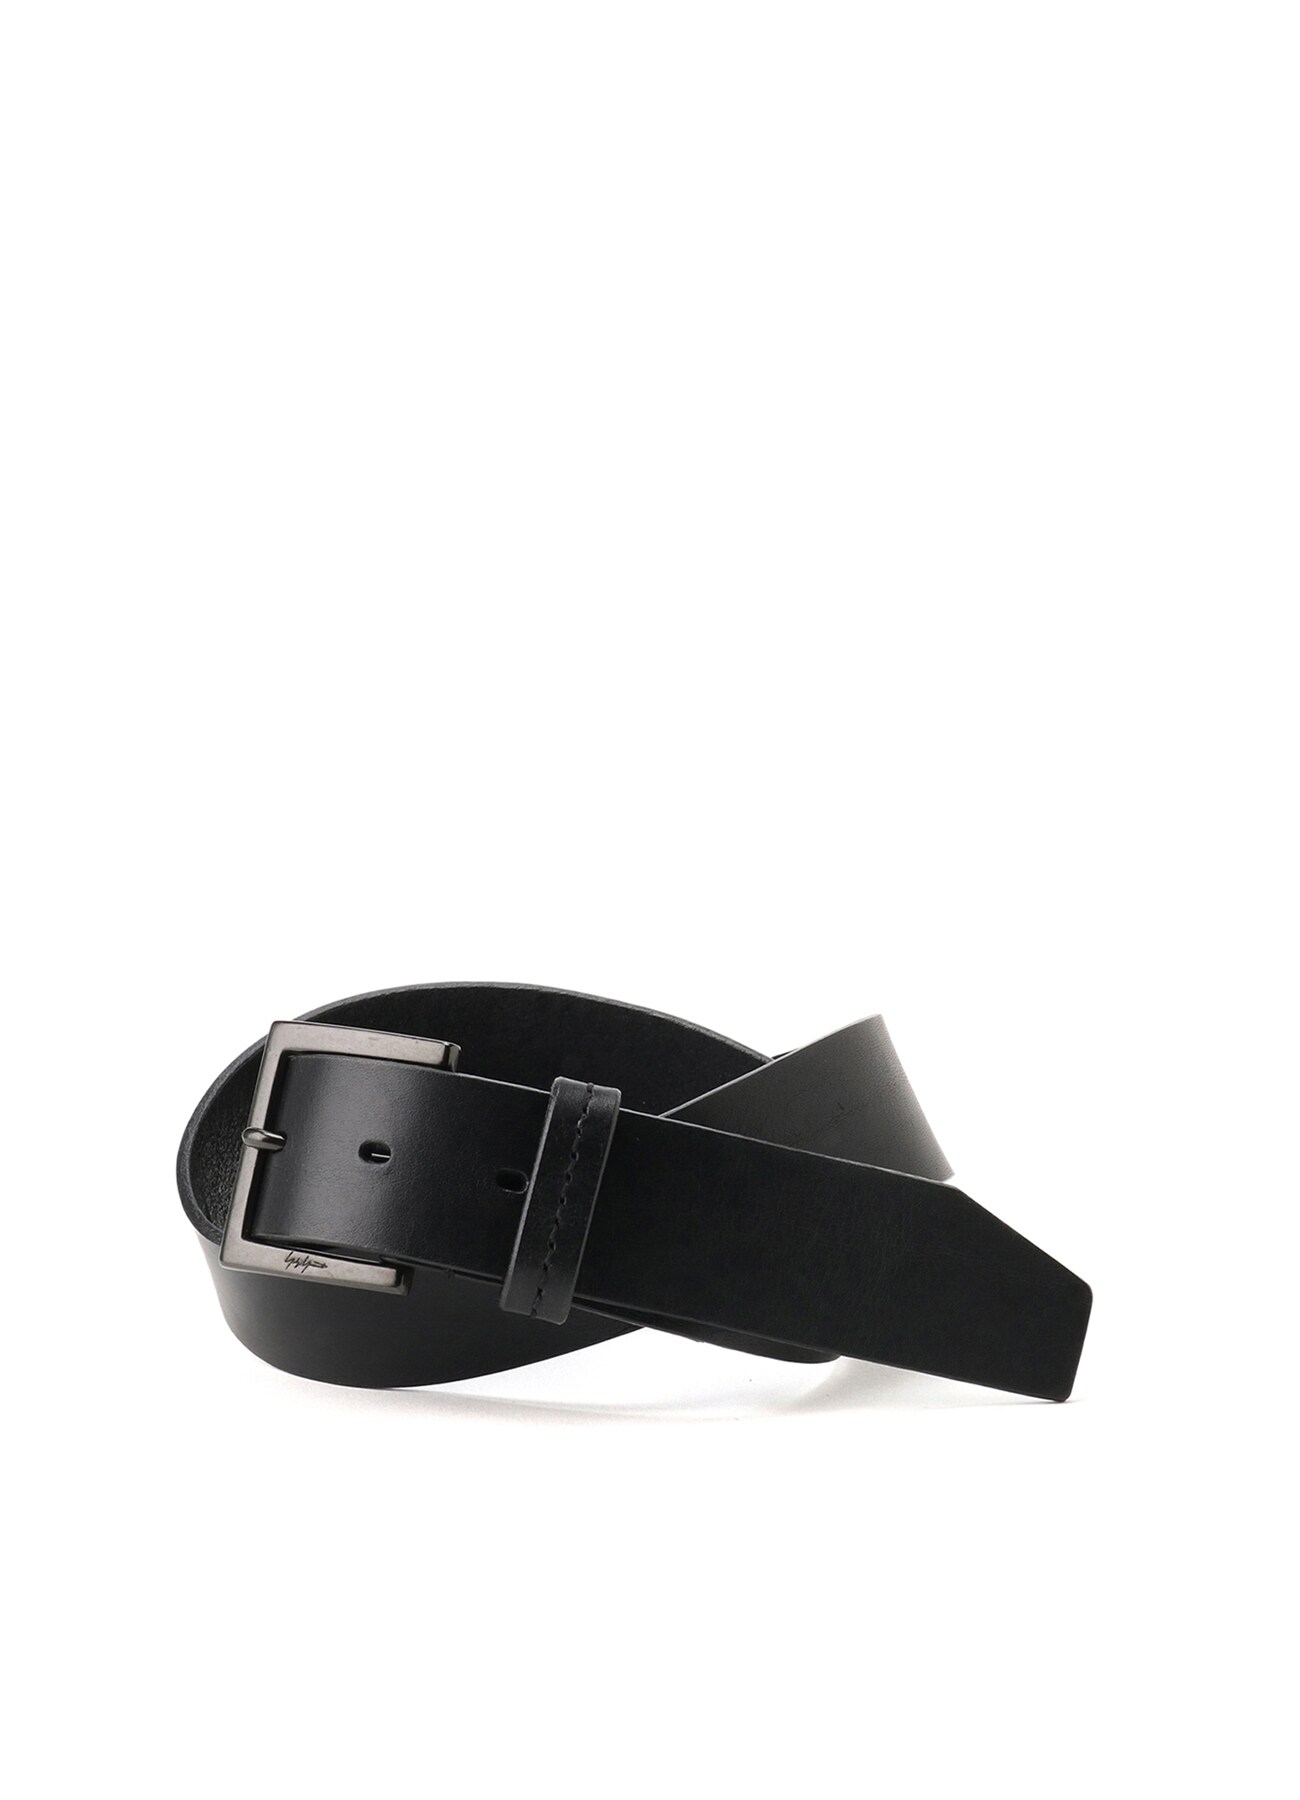 ACCESSORIES ｜Yohji Yamamoto POUR HOMME ｜ [Official] THE SHOP 